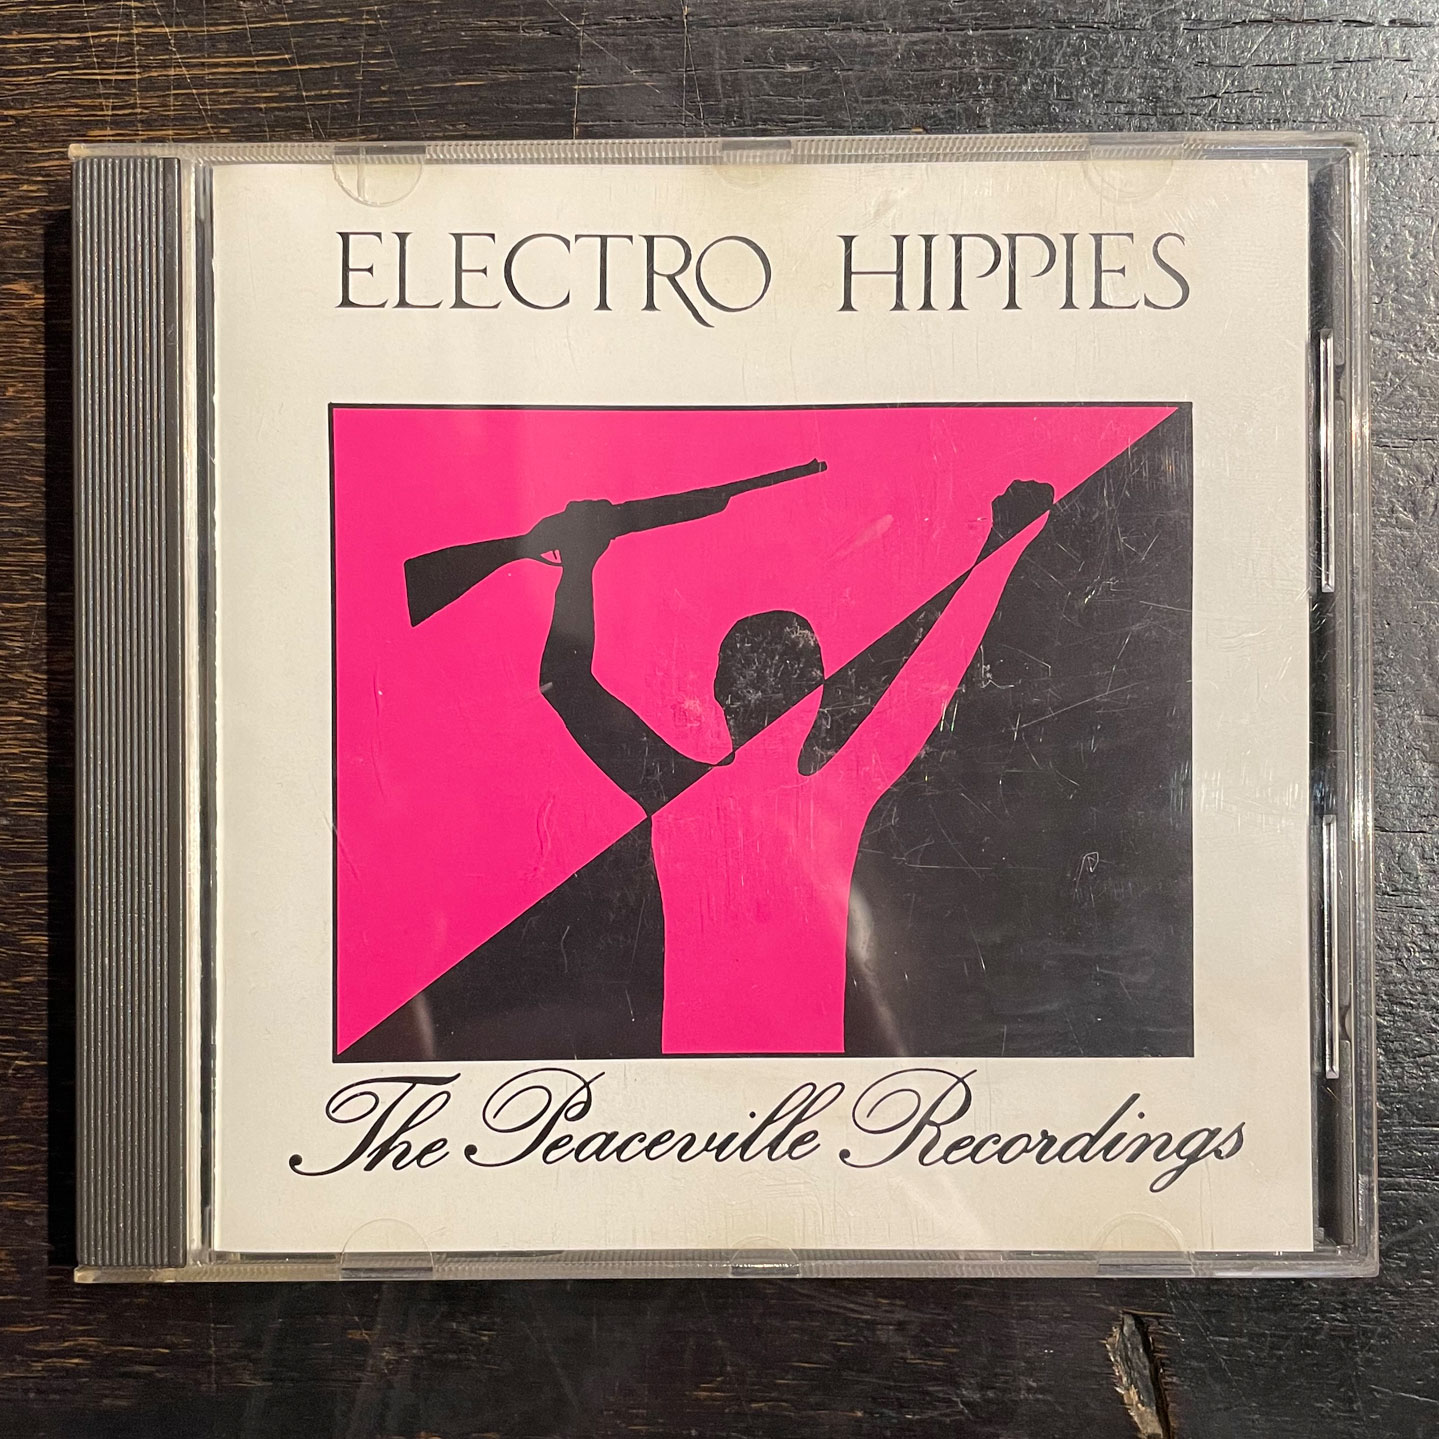 USED! ELECTRO HIPPIES CD The Peaceville Recordings